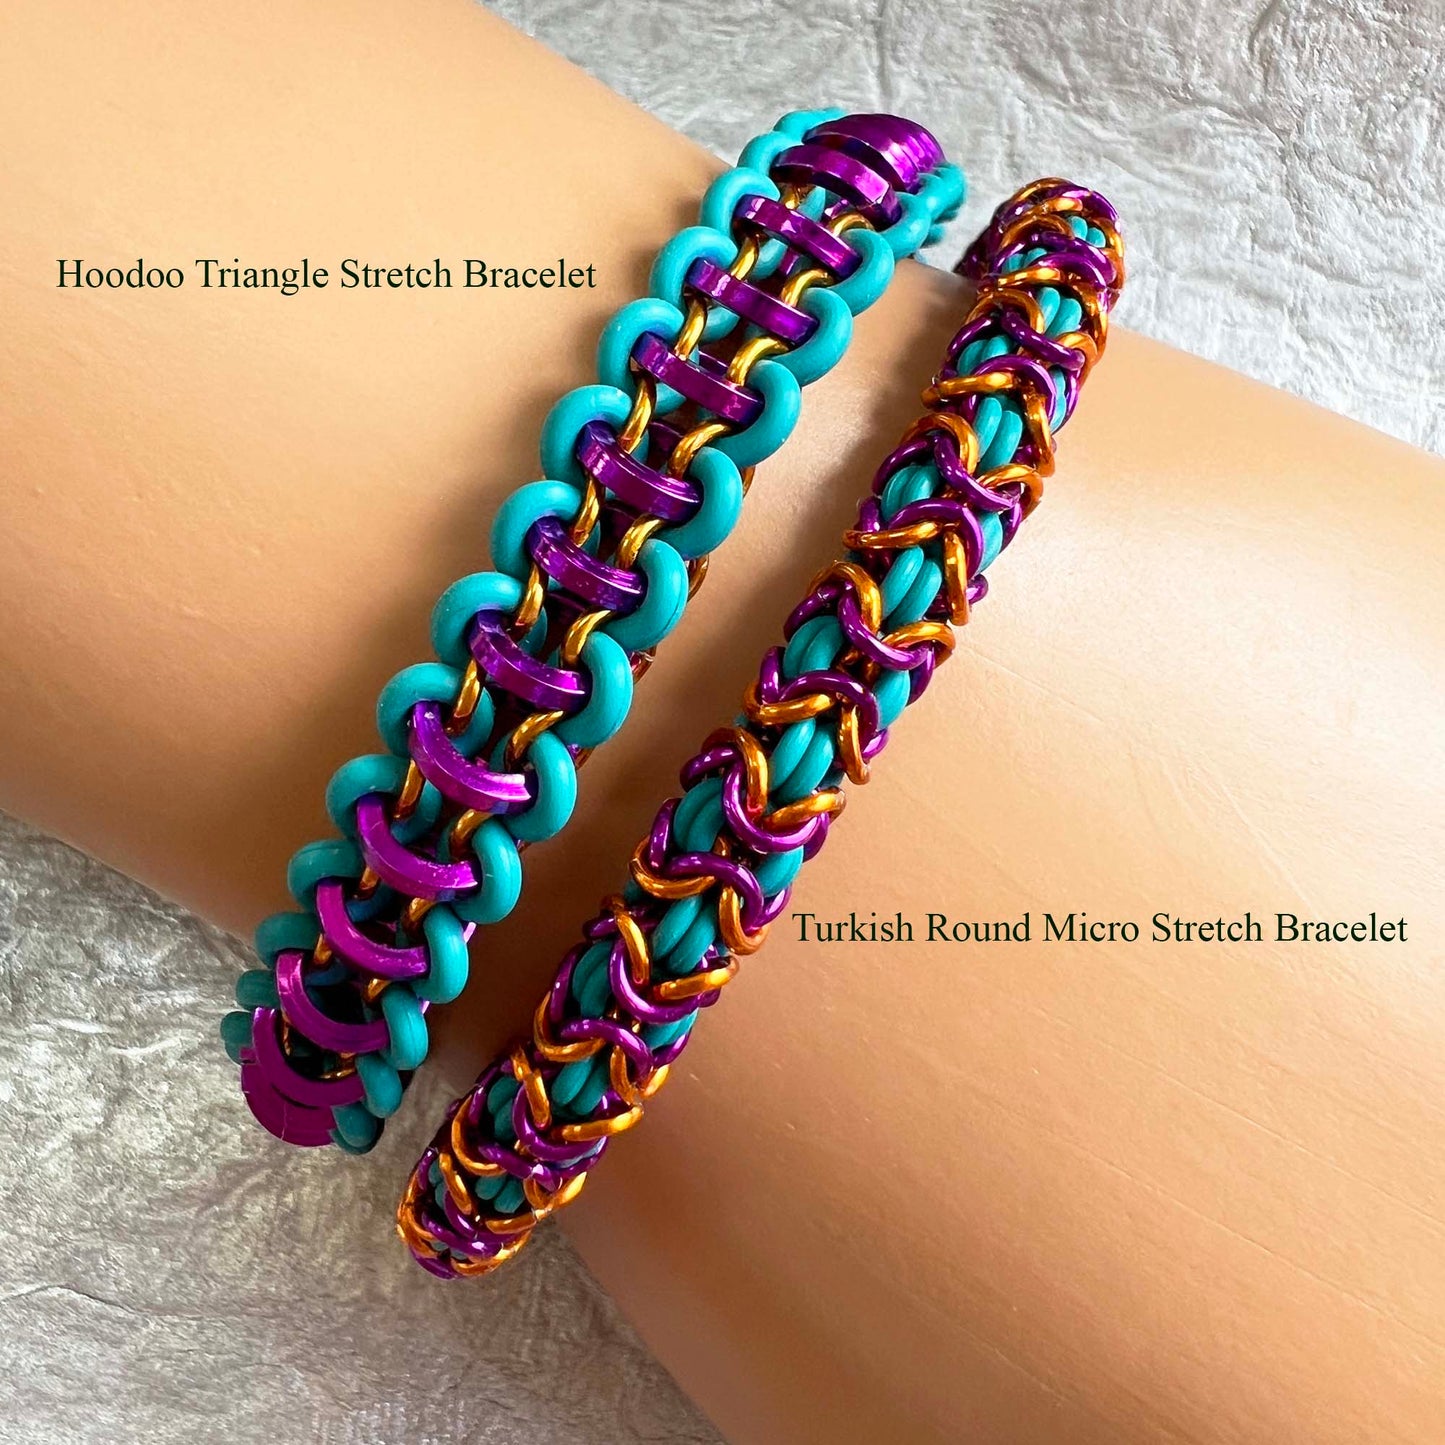 Hoodoo Triangle Stretch Bracelet Kit with Video Class - Teal, Violet and Orange